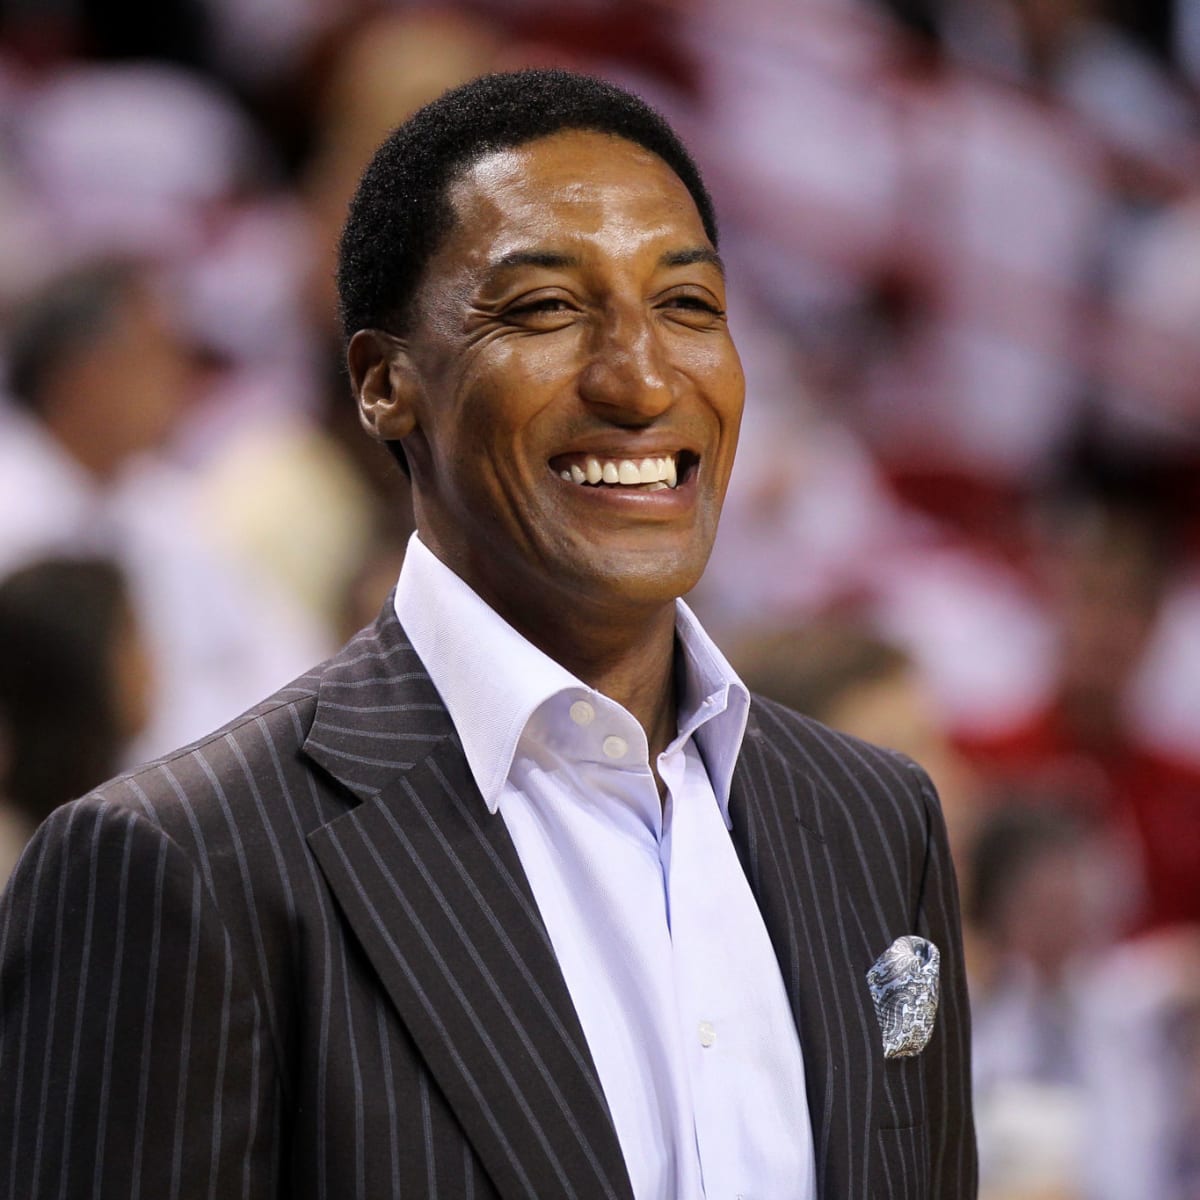 NBA 75: At No. 32, Scottie Pippen's journey to becoming one of the